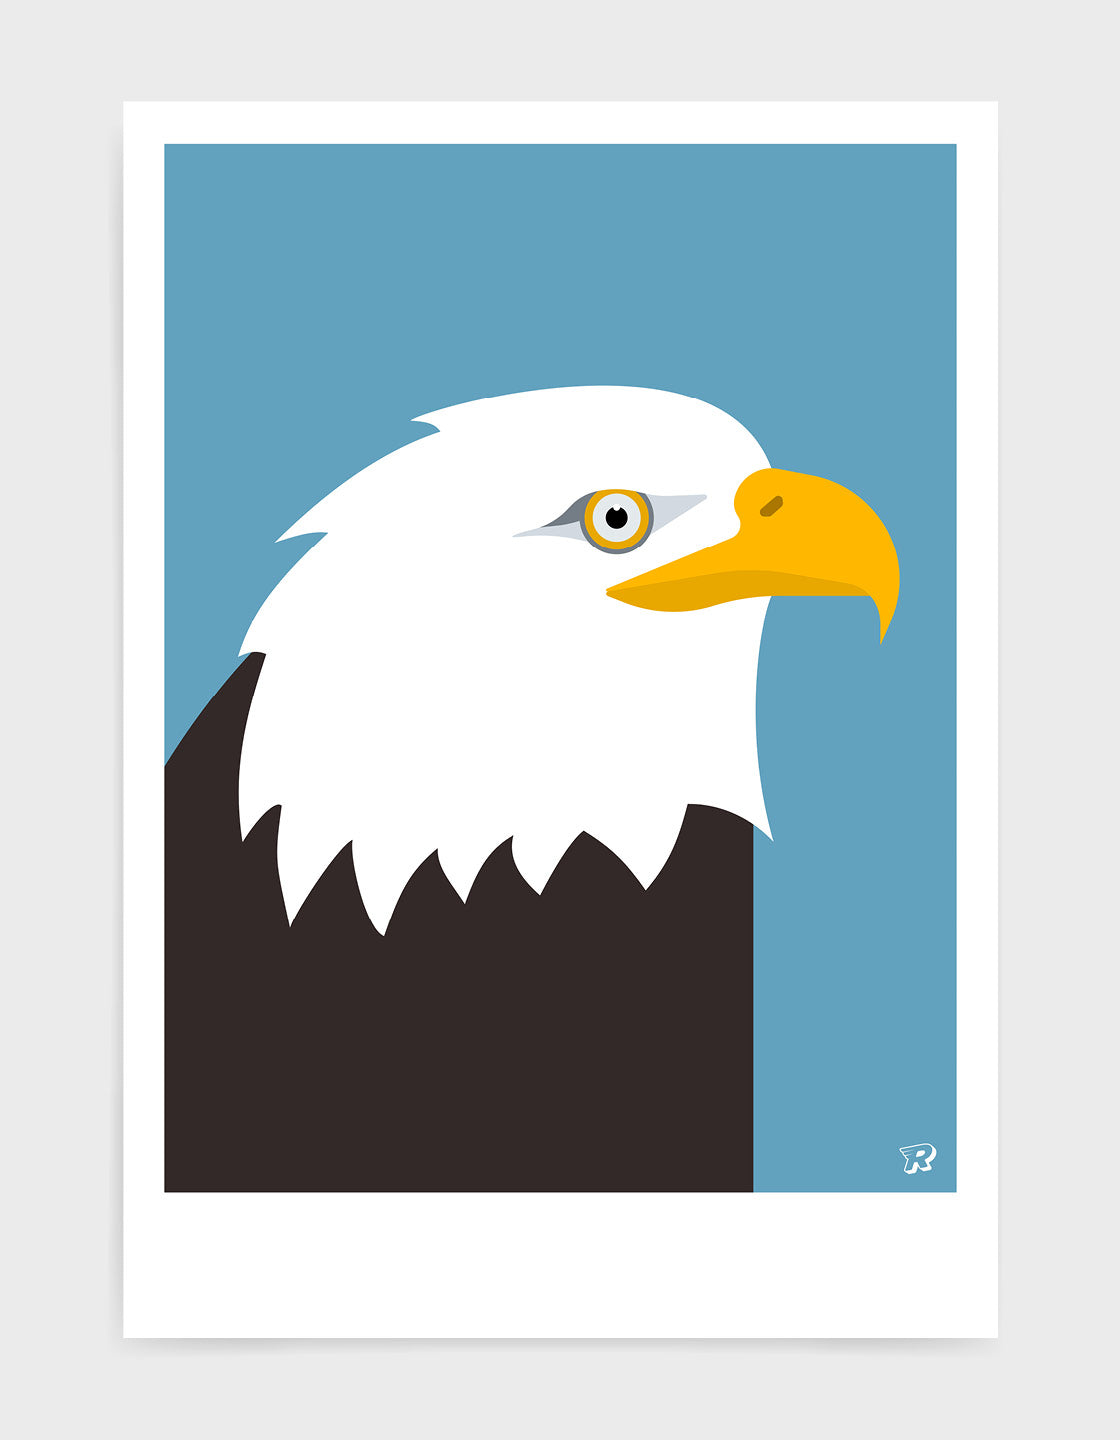 art print of an American bald eagle in profile against a sky blue background